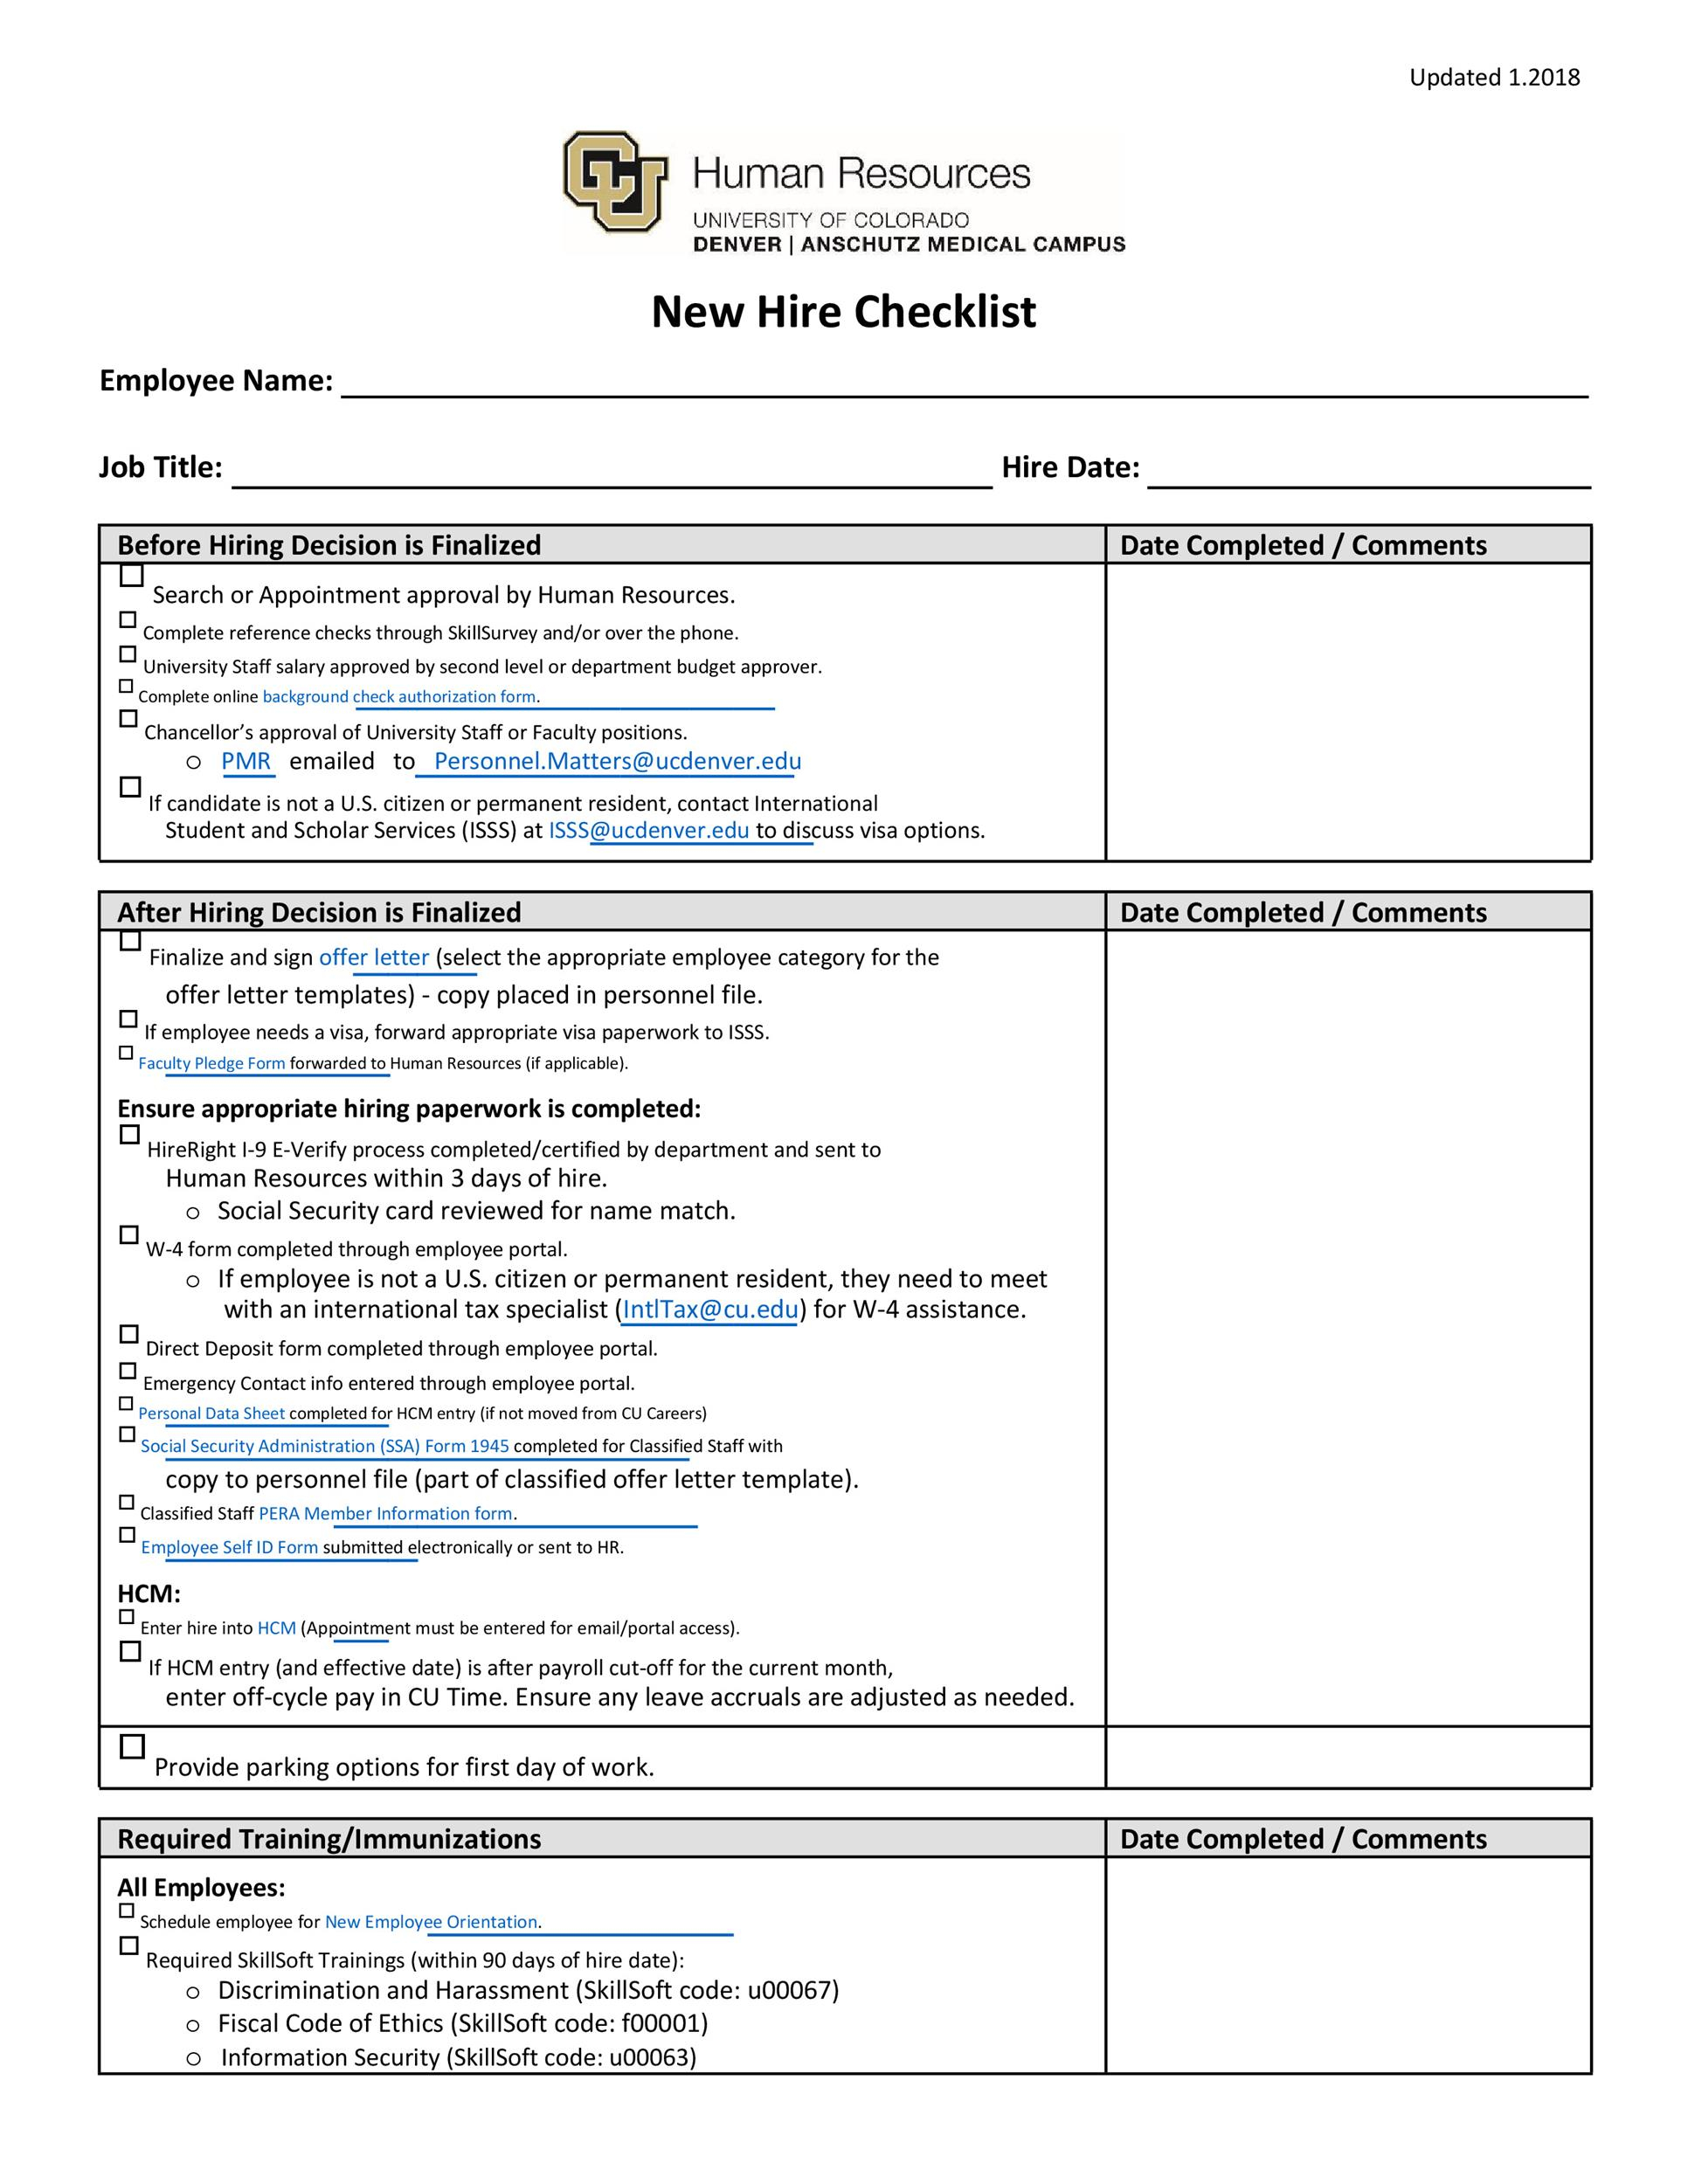 10 Useful New Hire Checklist Templates & Forms ᐅ TemplateLab With Regard To Employee New Hire Checklist Template Inside Employee New Hire Checklist Template